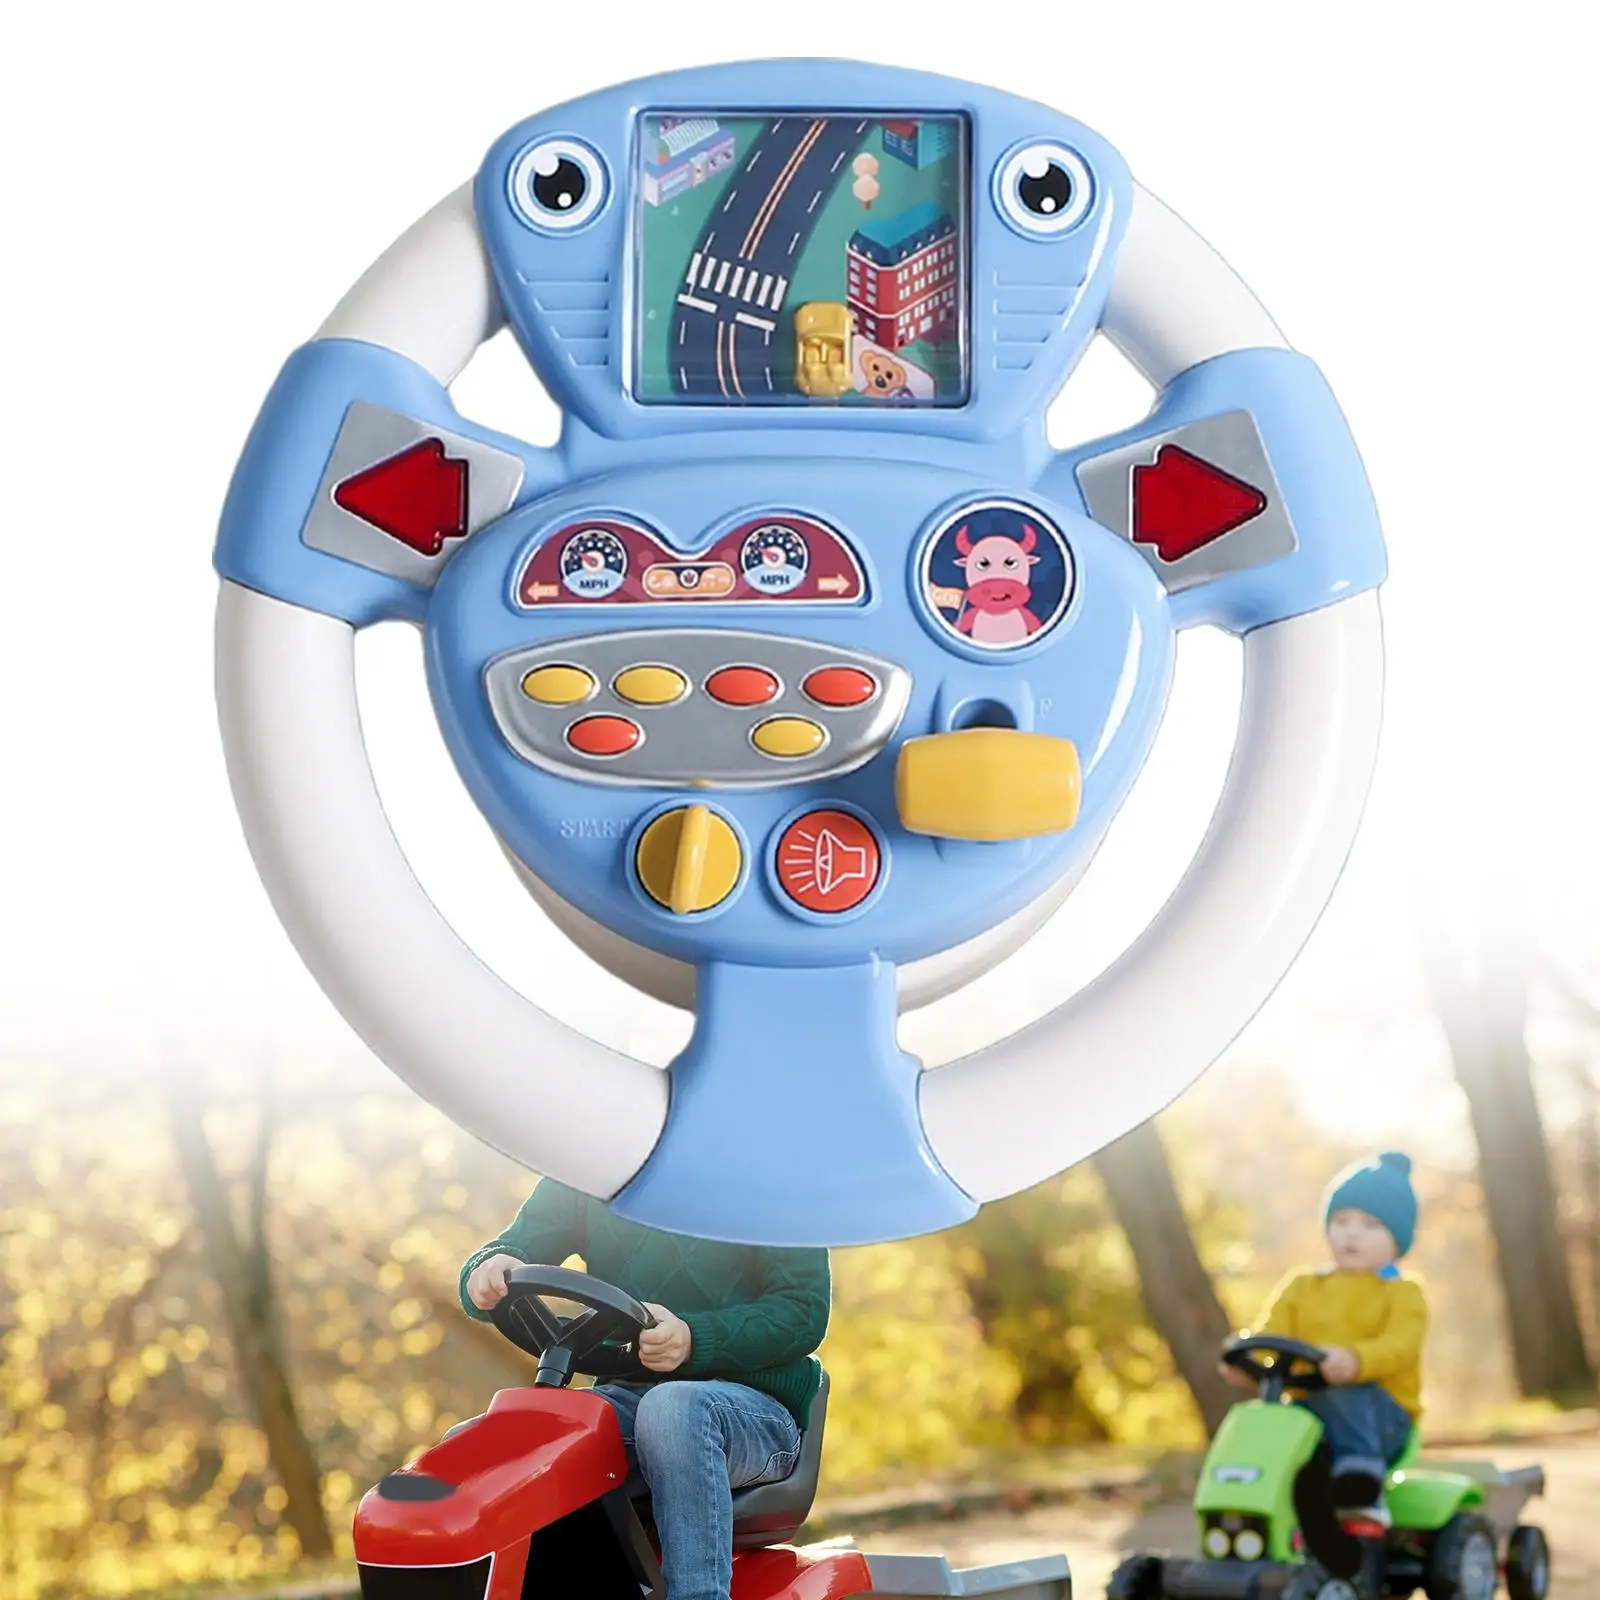 Steering Wheel Toys Pretend Play Toy Interactive Toys Electric Wheel Toy for Children